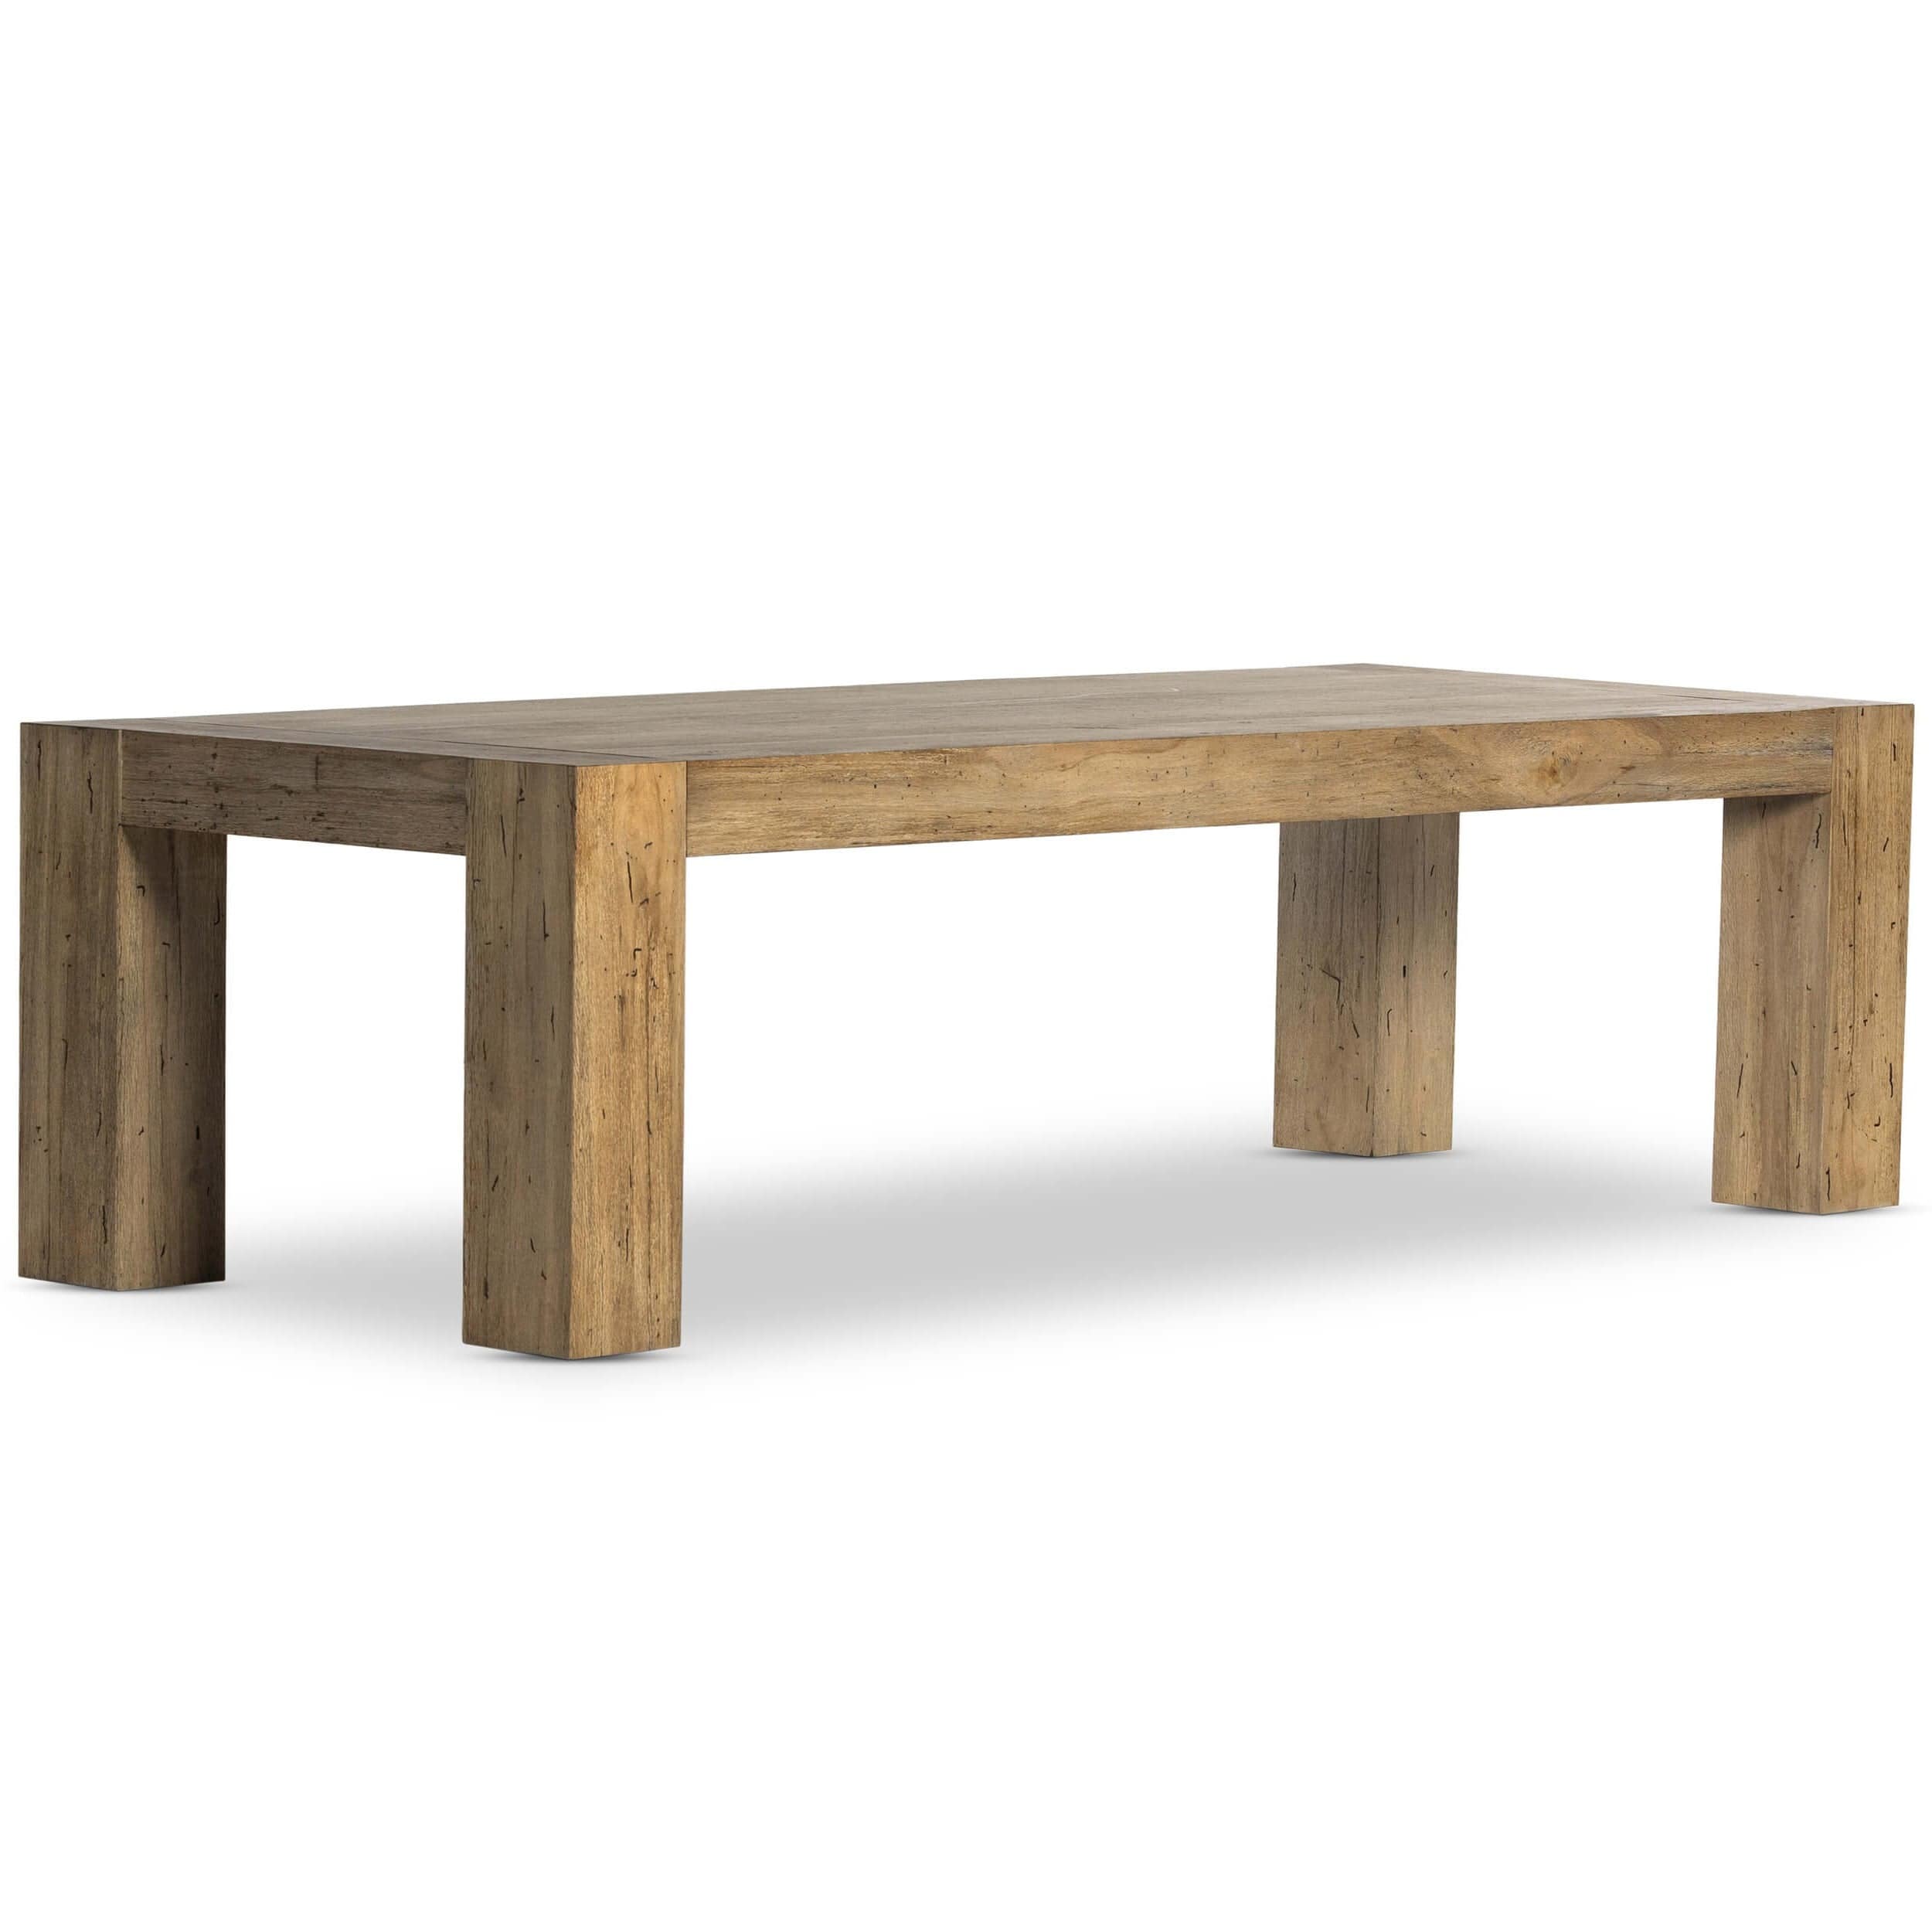 Image of Abaso Dining Table, Rustic Wormwood